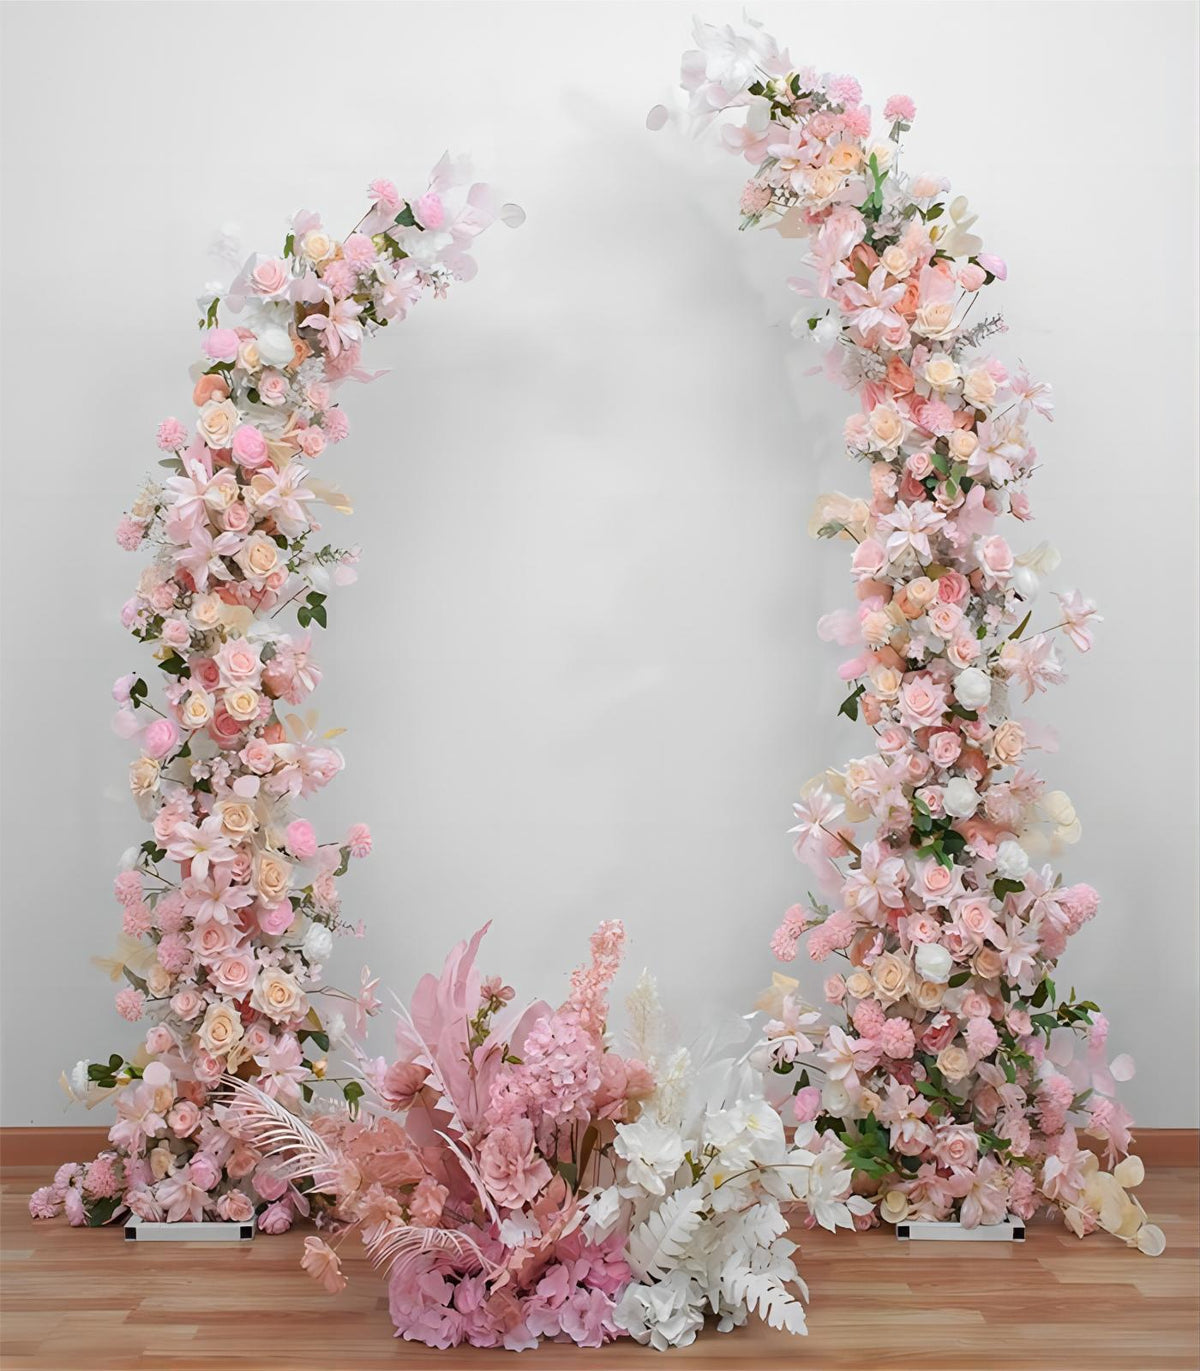 Horn Arch Pink Lily Rose Artificial Flower Wedding Party Birthday Backdrop Decor CH9131-1